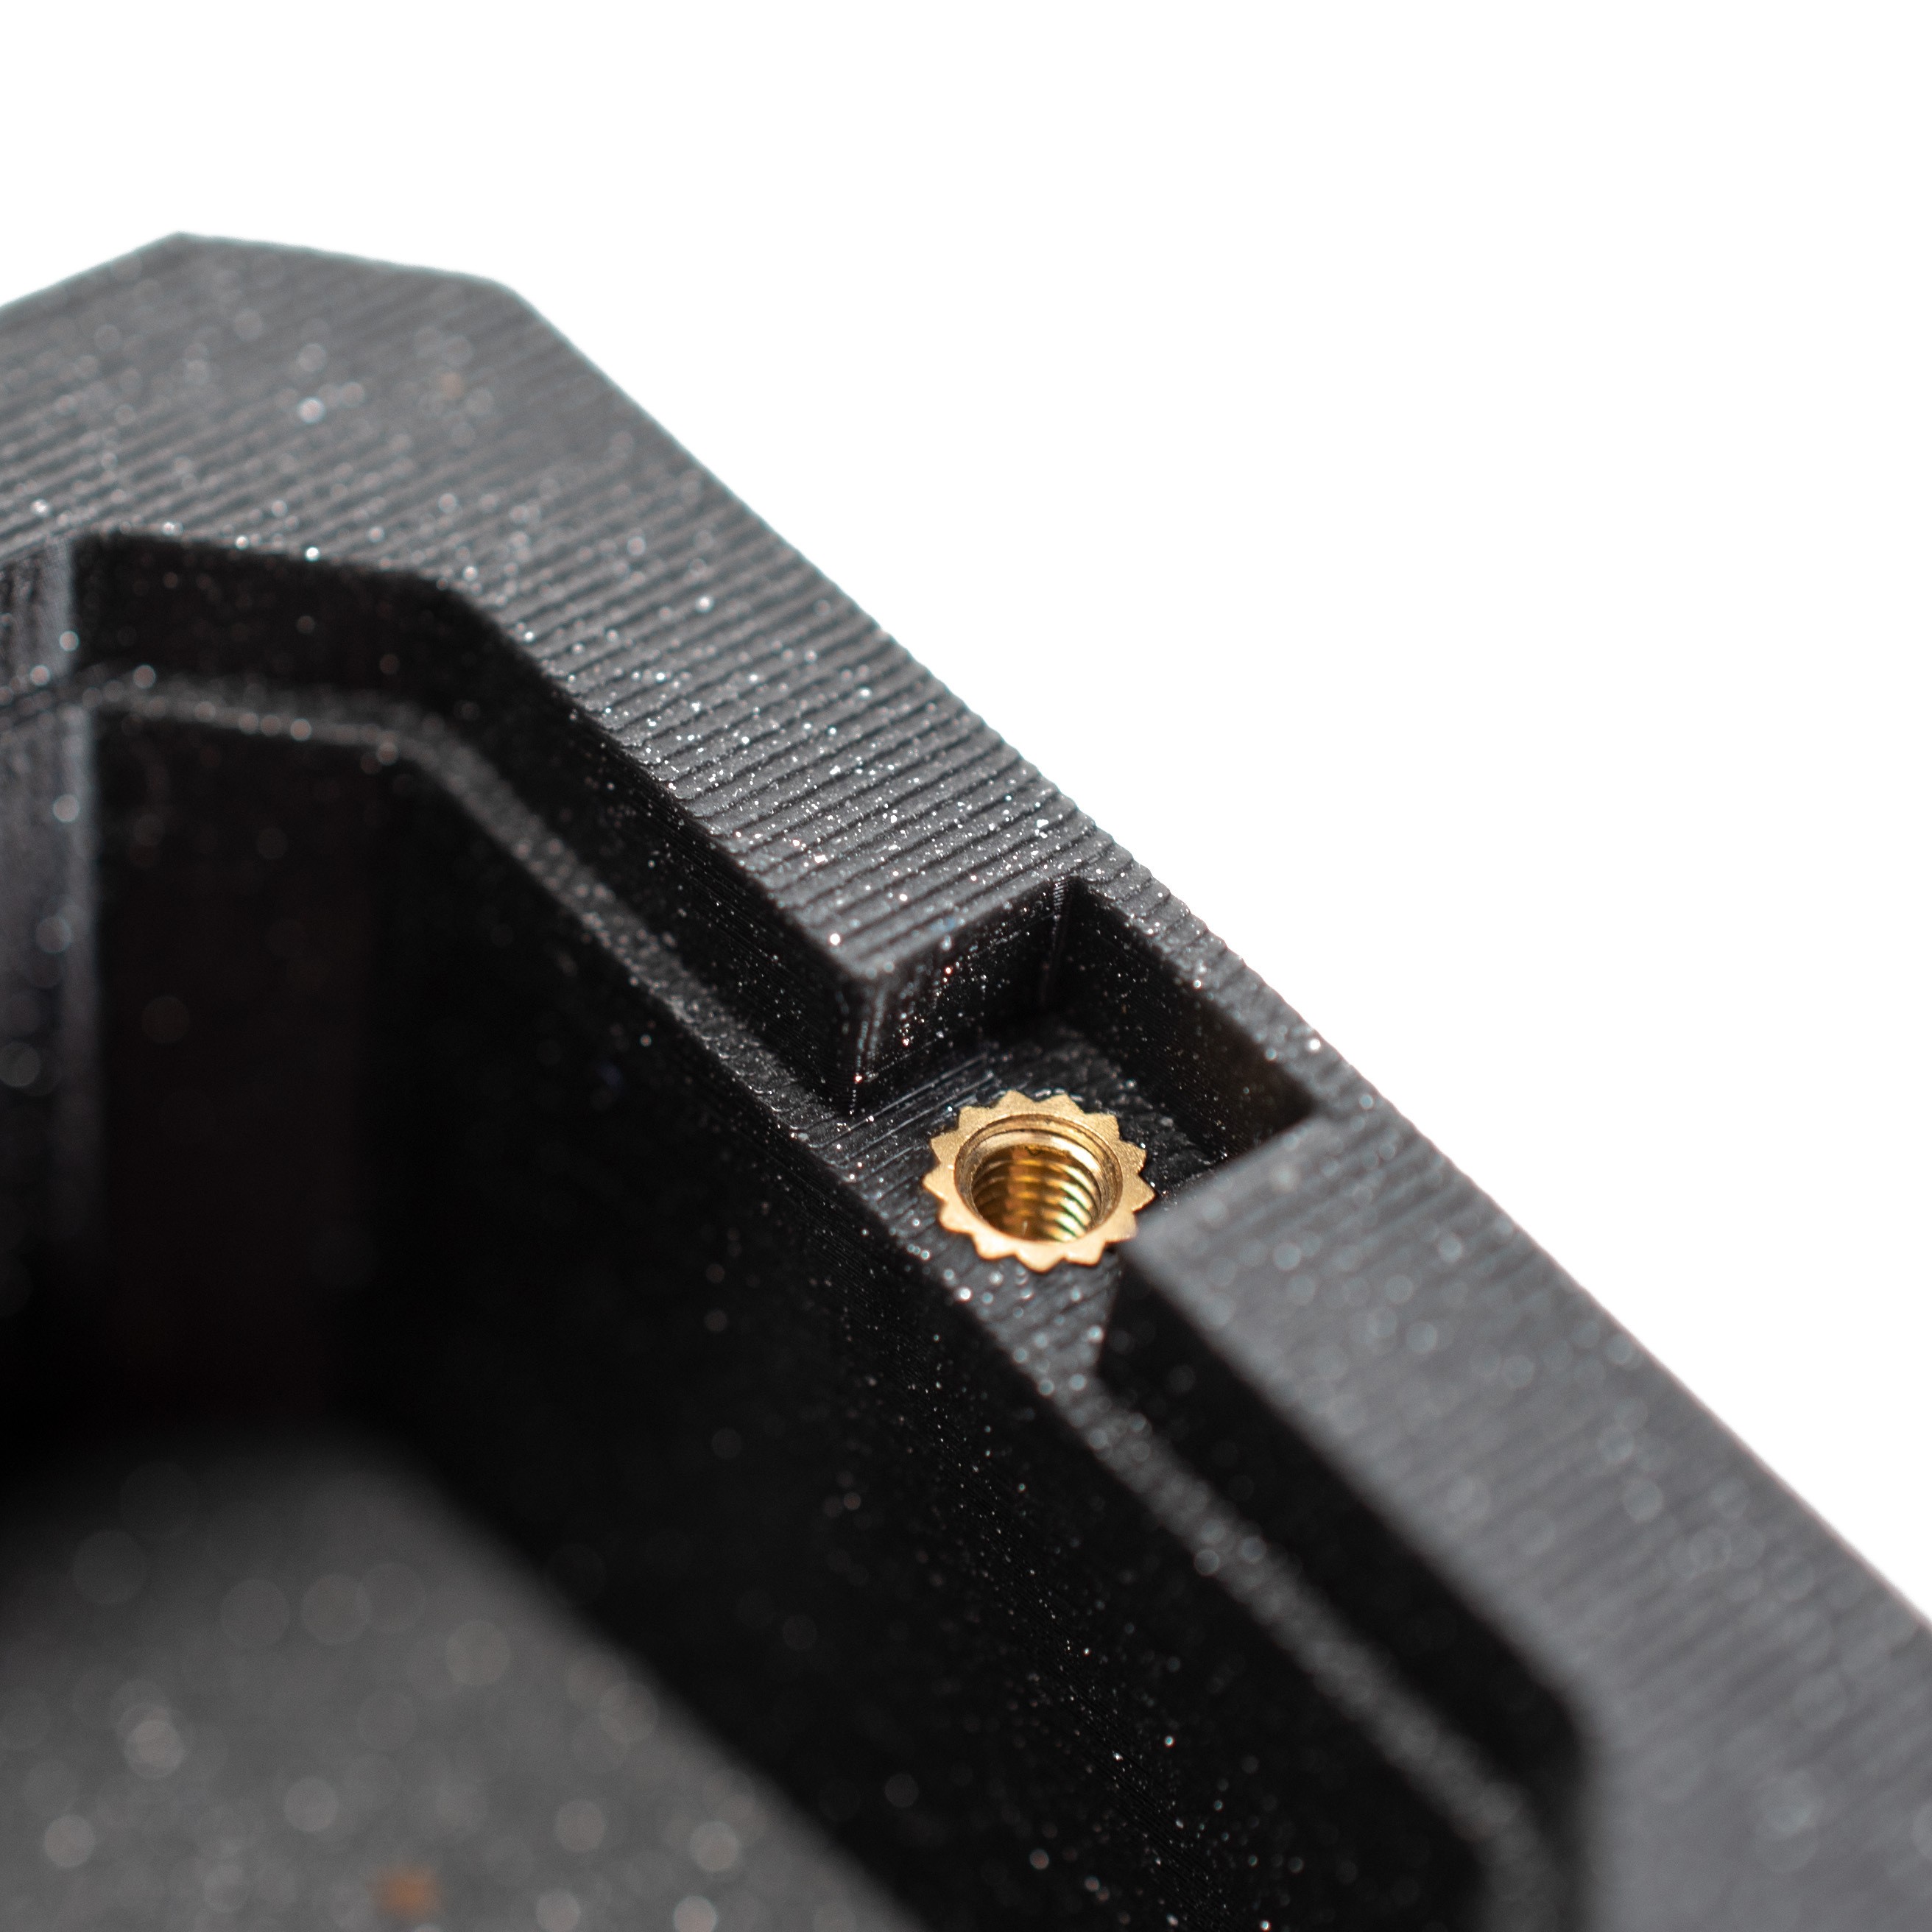 How to size a hole for M3 heat set insert? Resin print : r/3Dprinting